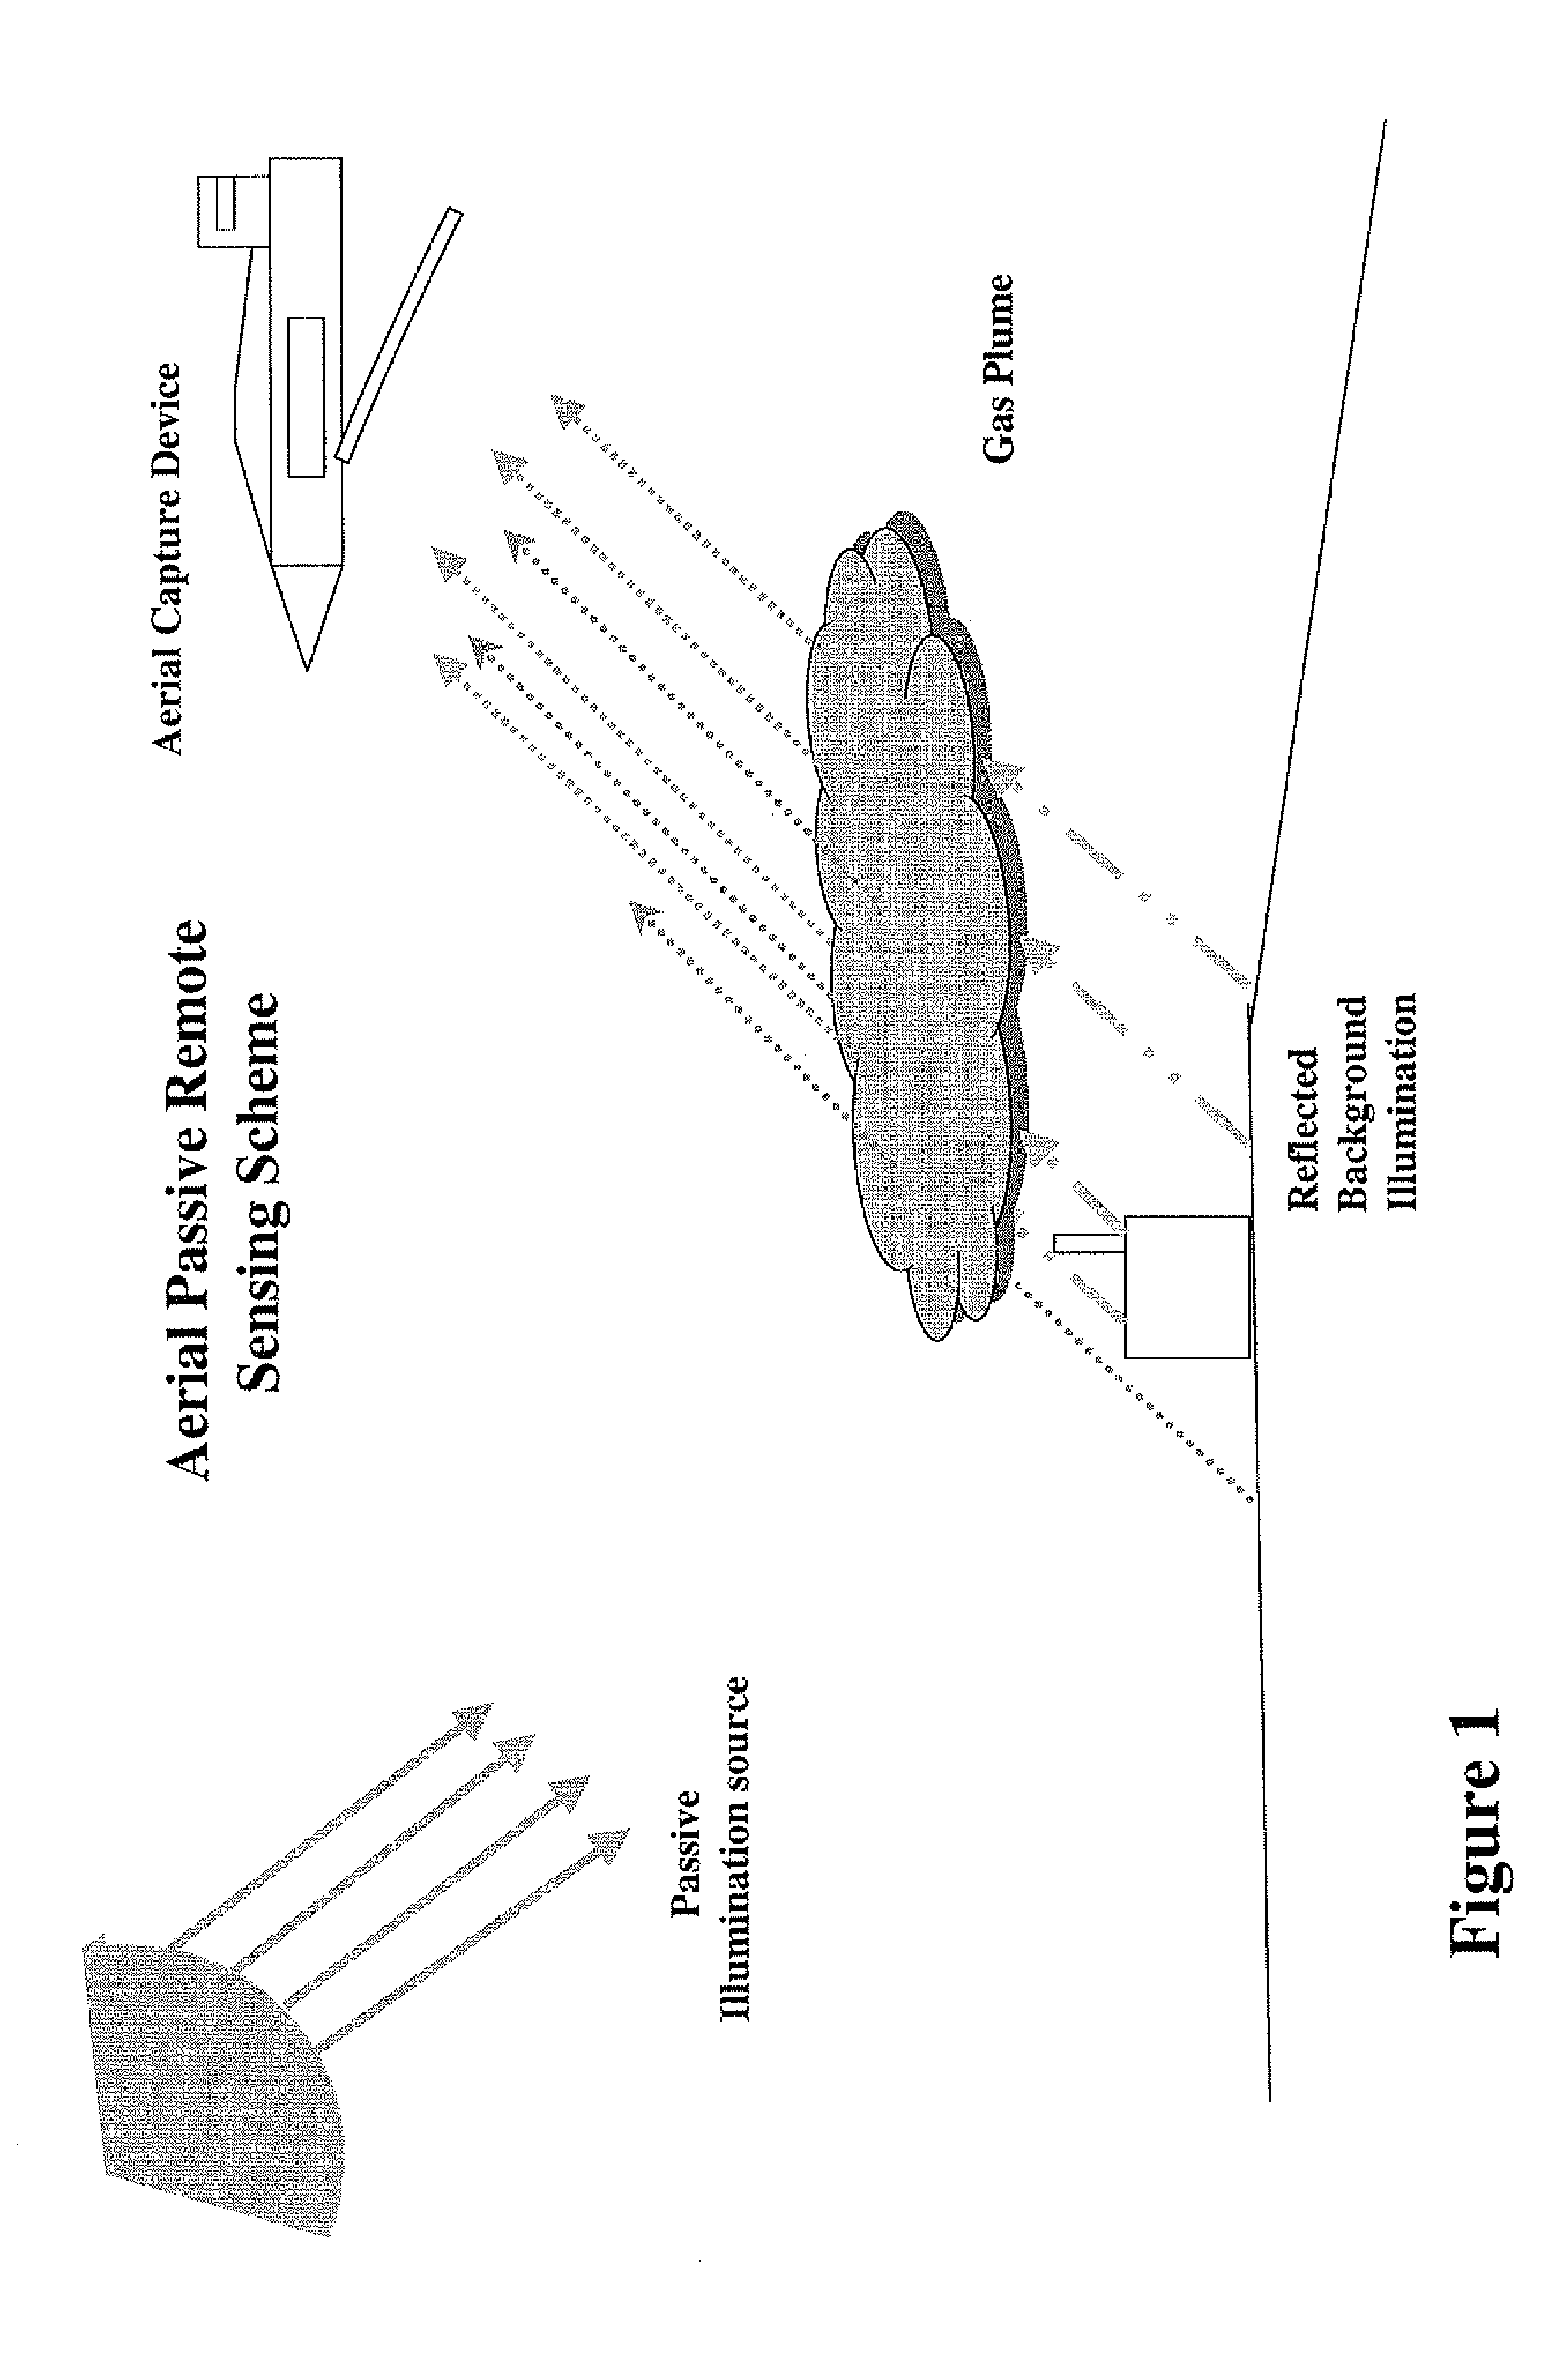 Method for remote spectral analysis of gas plumes